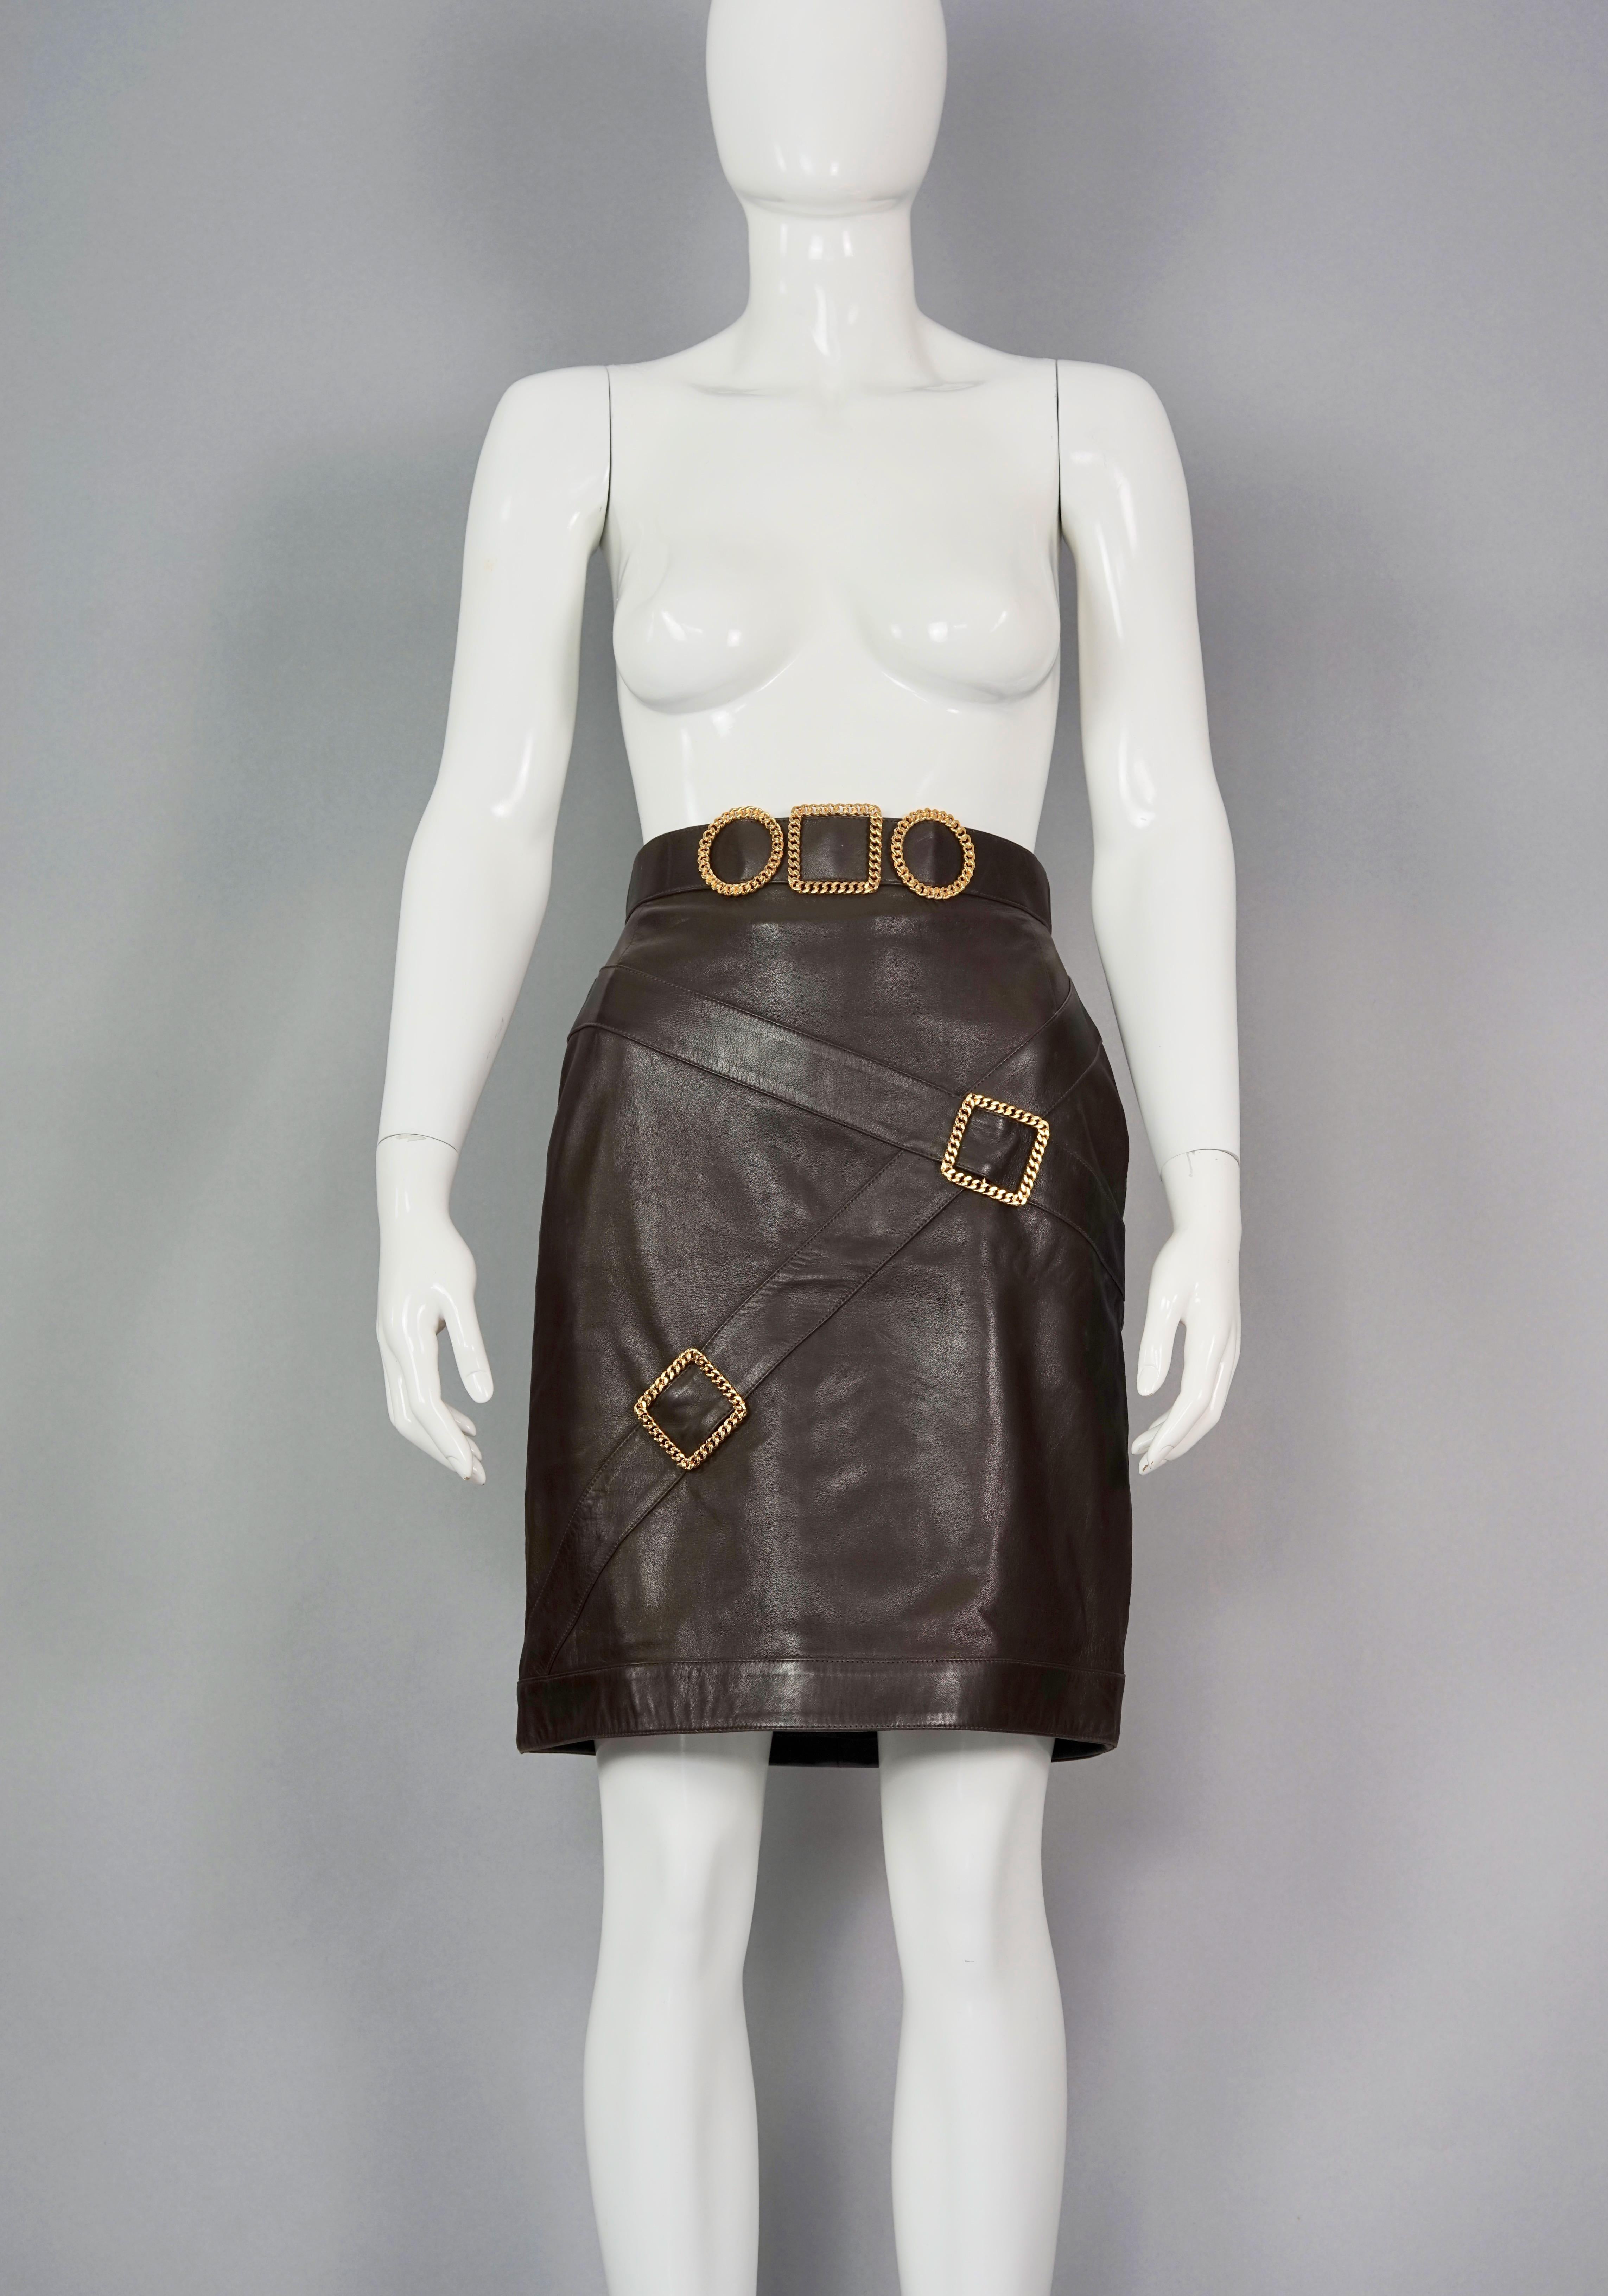 Vintage Iconic CHANEL Buckle Leather Skirt

Measurements taken laid flat, please double waist and hips:
Waist: 13.78 inches (35 cm)
Hips: 18.11 inches (46 cm)
Length: 20.47 inches (52 cm)

Features:
- 100% Authentic CHANEL.
- Brown lambskin pencil